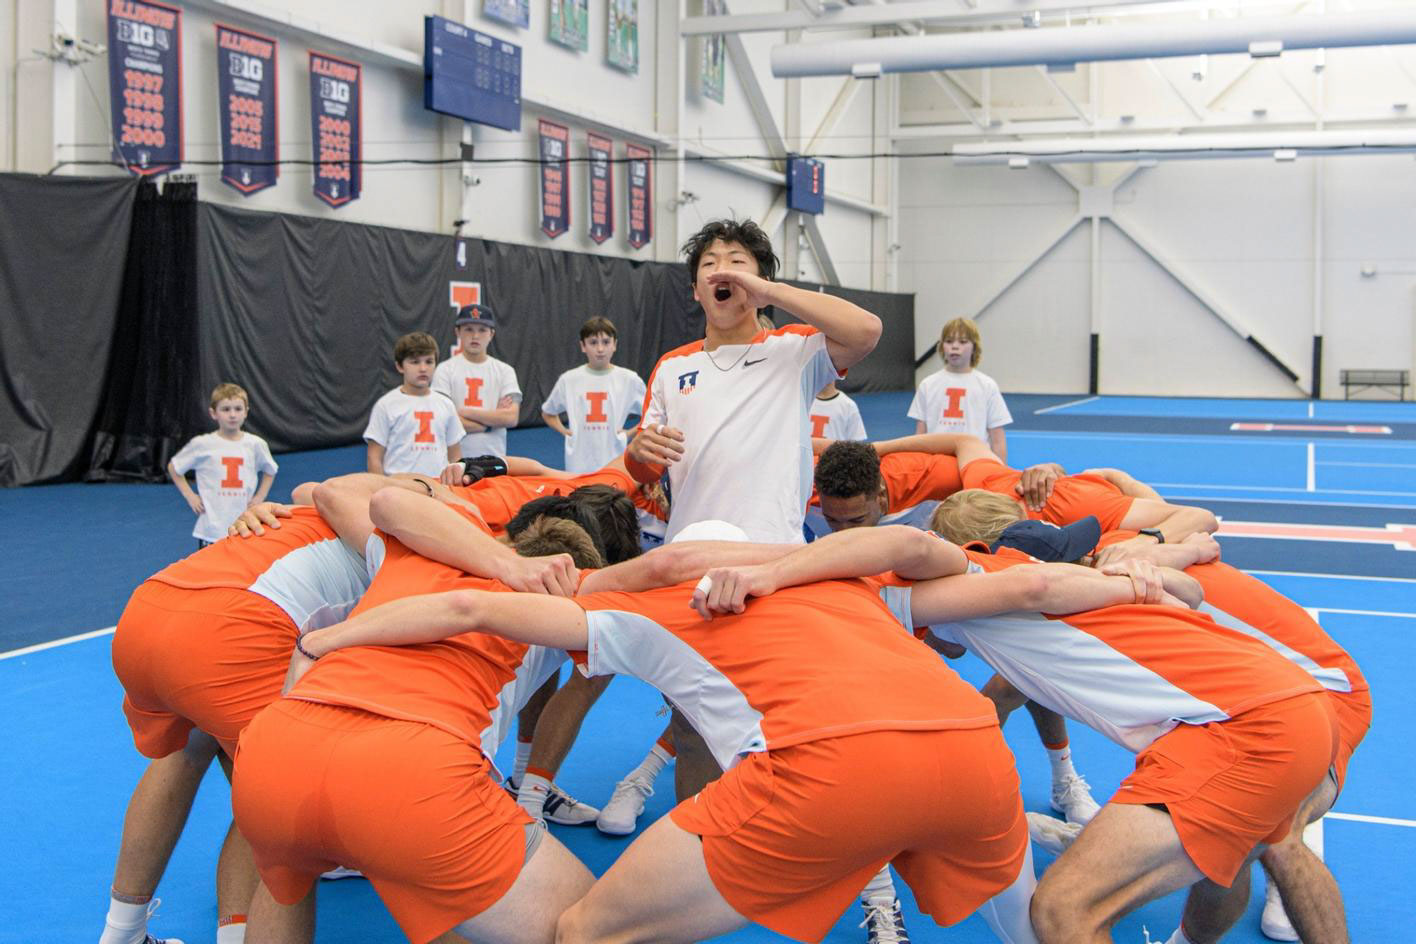 Illinois Men's Tennis players huddle before a match